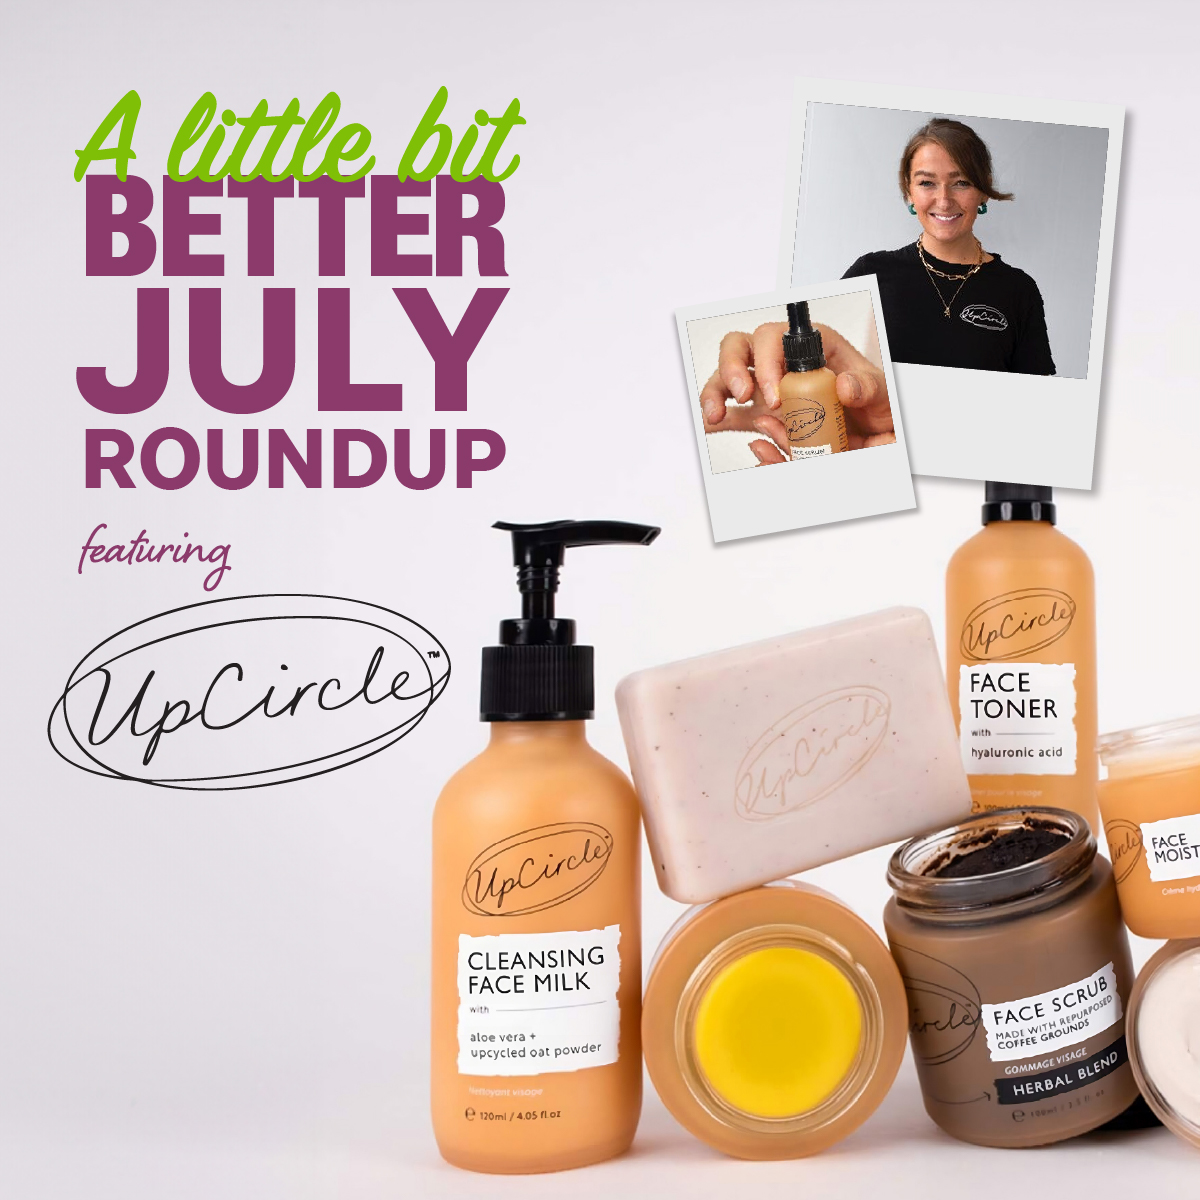 What do coffee grounds, fruit juice, and maple bark extract all have in common? They all make skin shine while giving second life to earth’s resources! Learn more about how @UpcircleBeauty is making upcycling look great: tinyurl.com/bdd7desp #littlebitbetter #plasticnegative